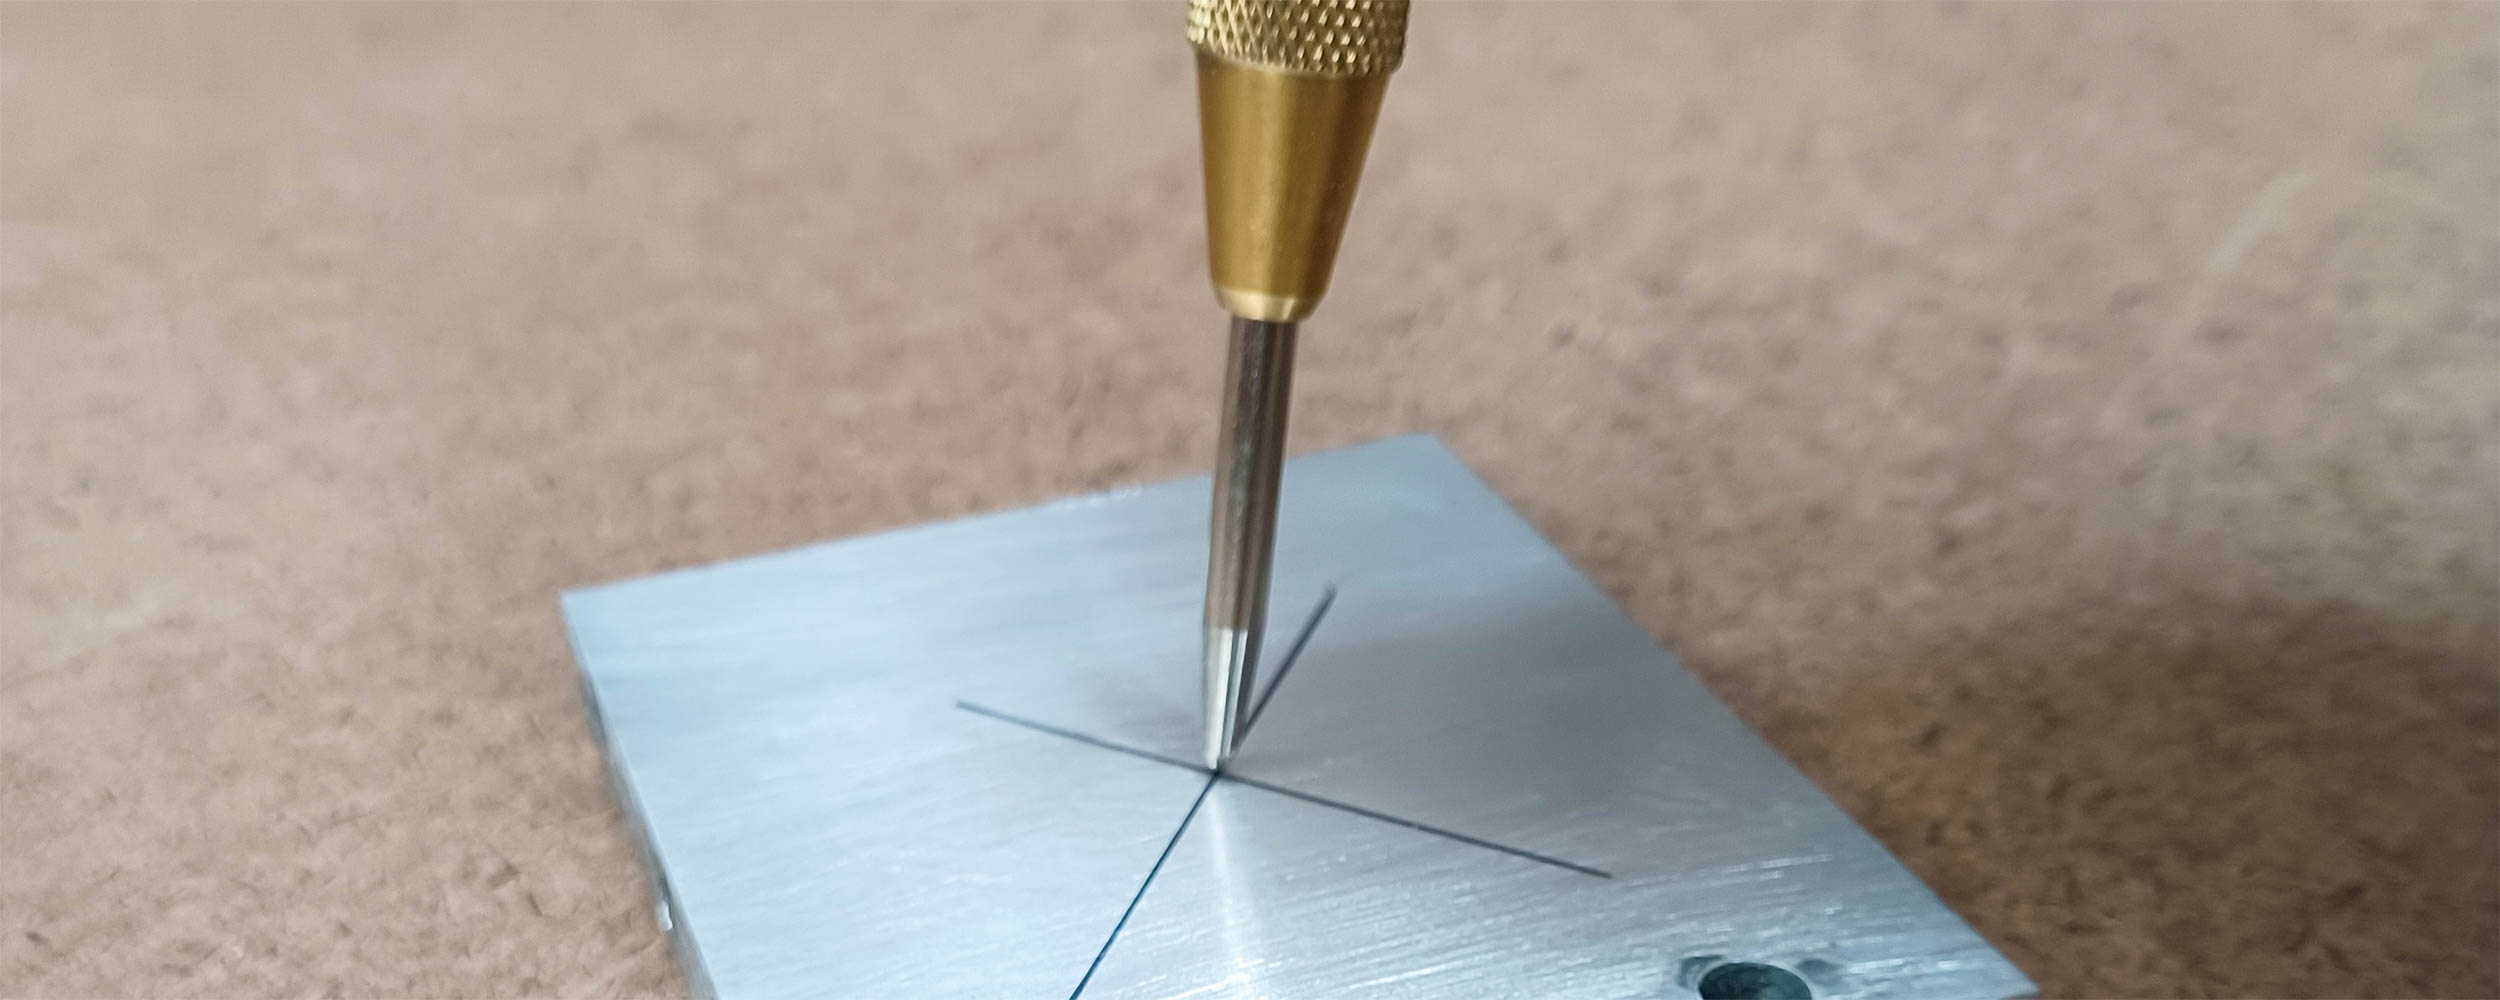 A center punch is perfect for marking metal